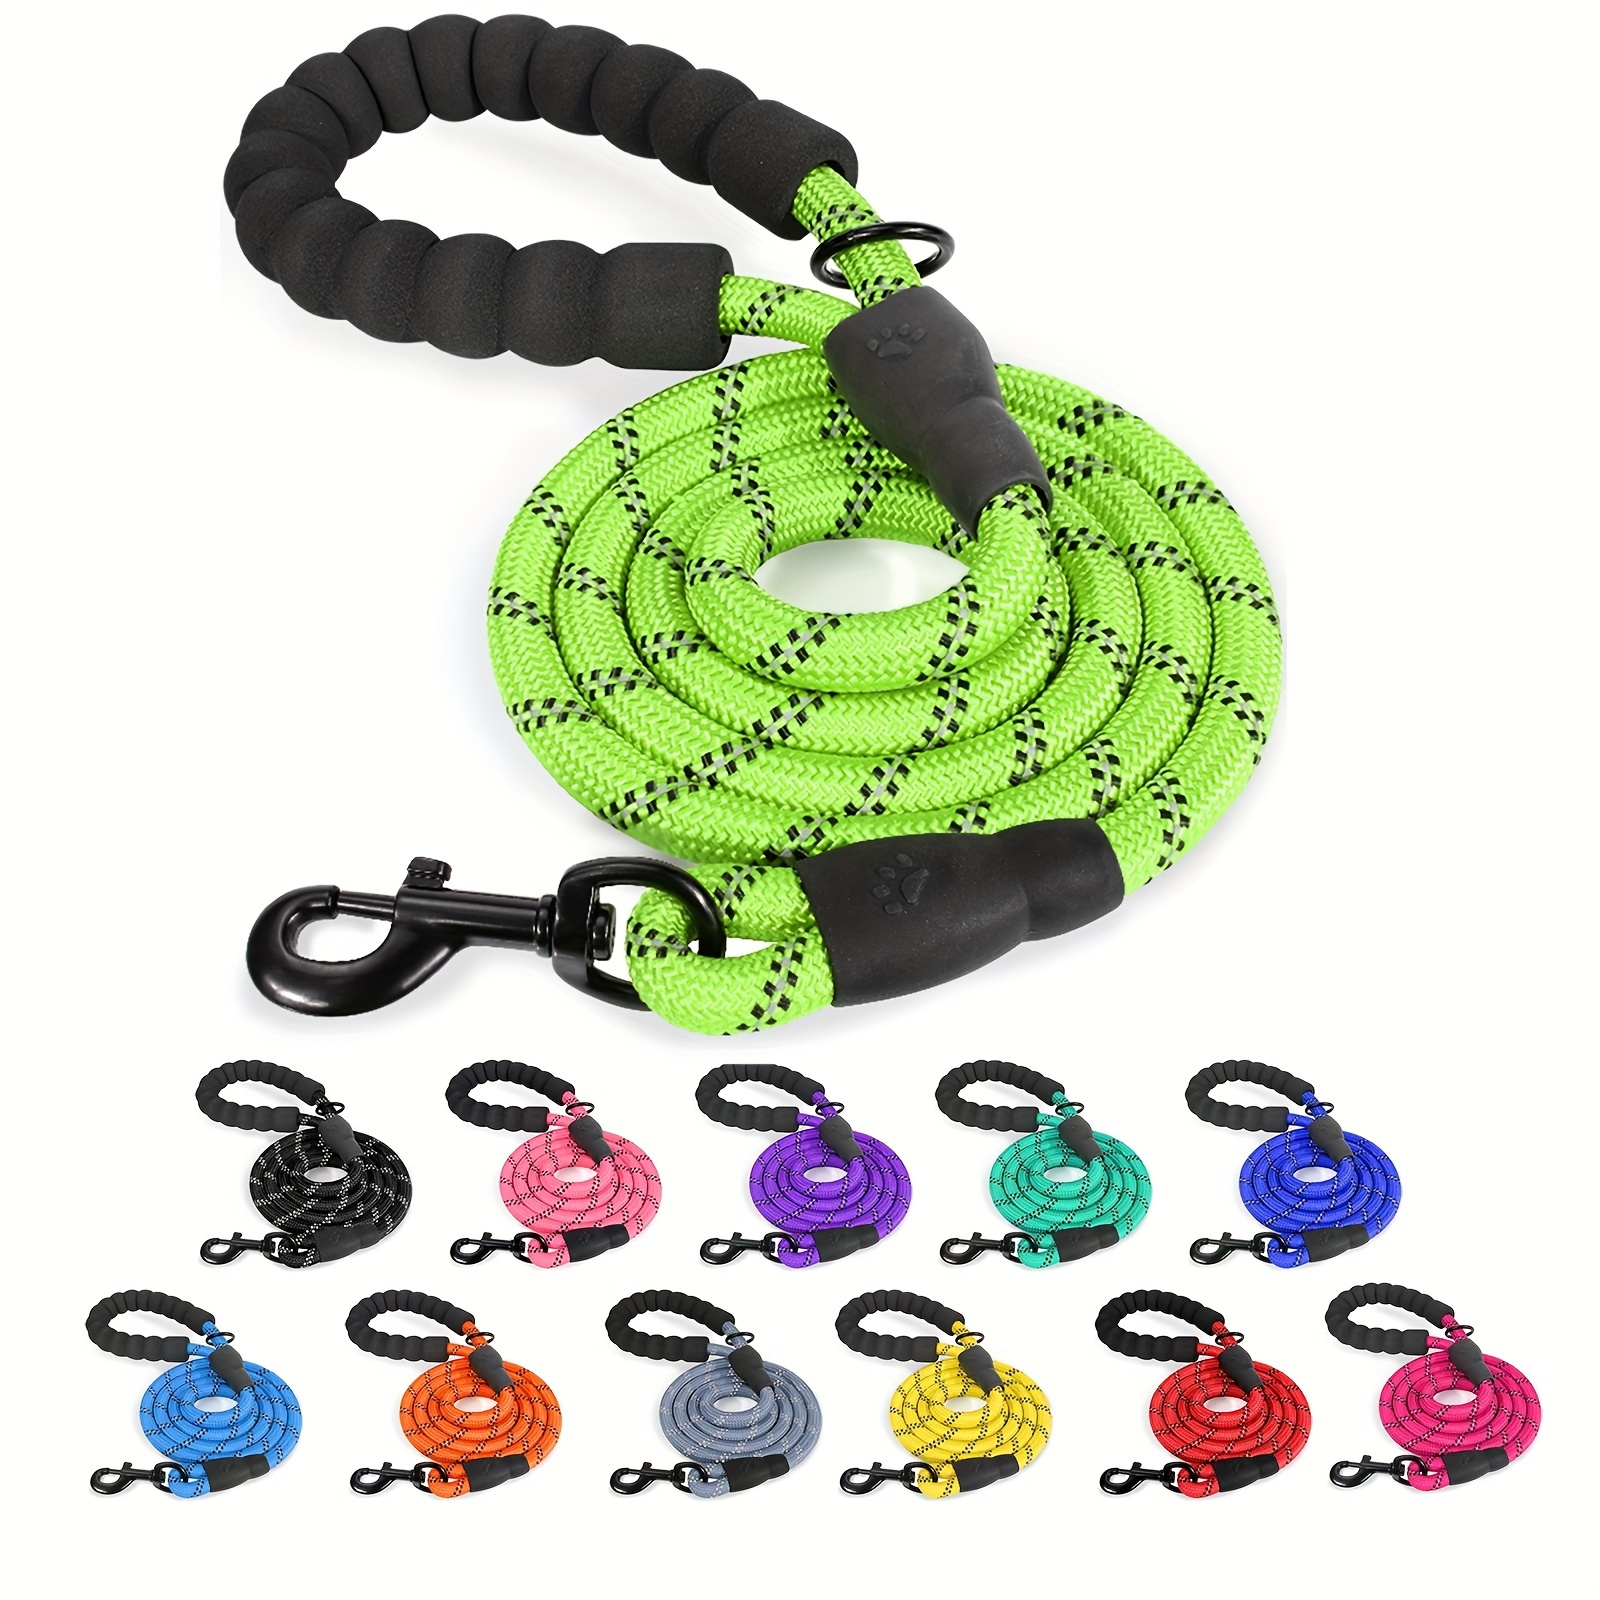 

Joytale Reflective Dog Leash With Comfortable Padded Handle - Ideal For Small, Medium, And Large Dogs - 4/5/6 Ft Length Options Available